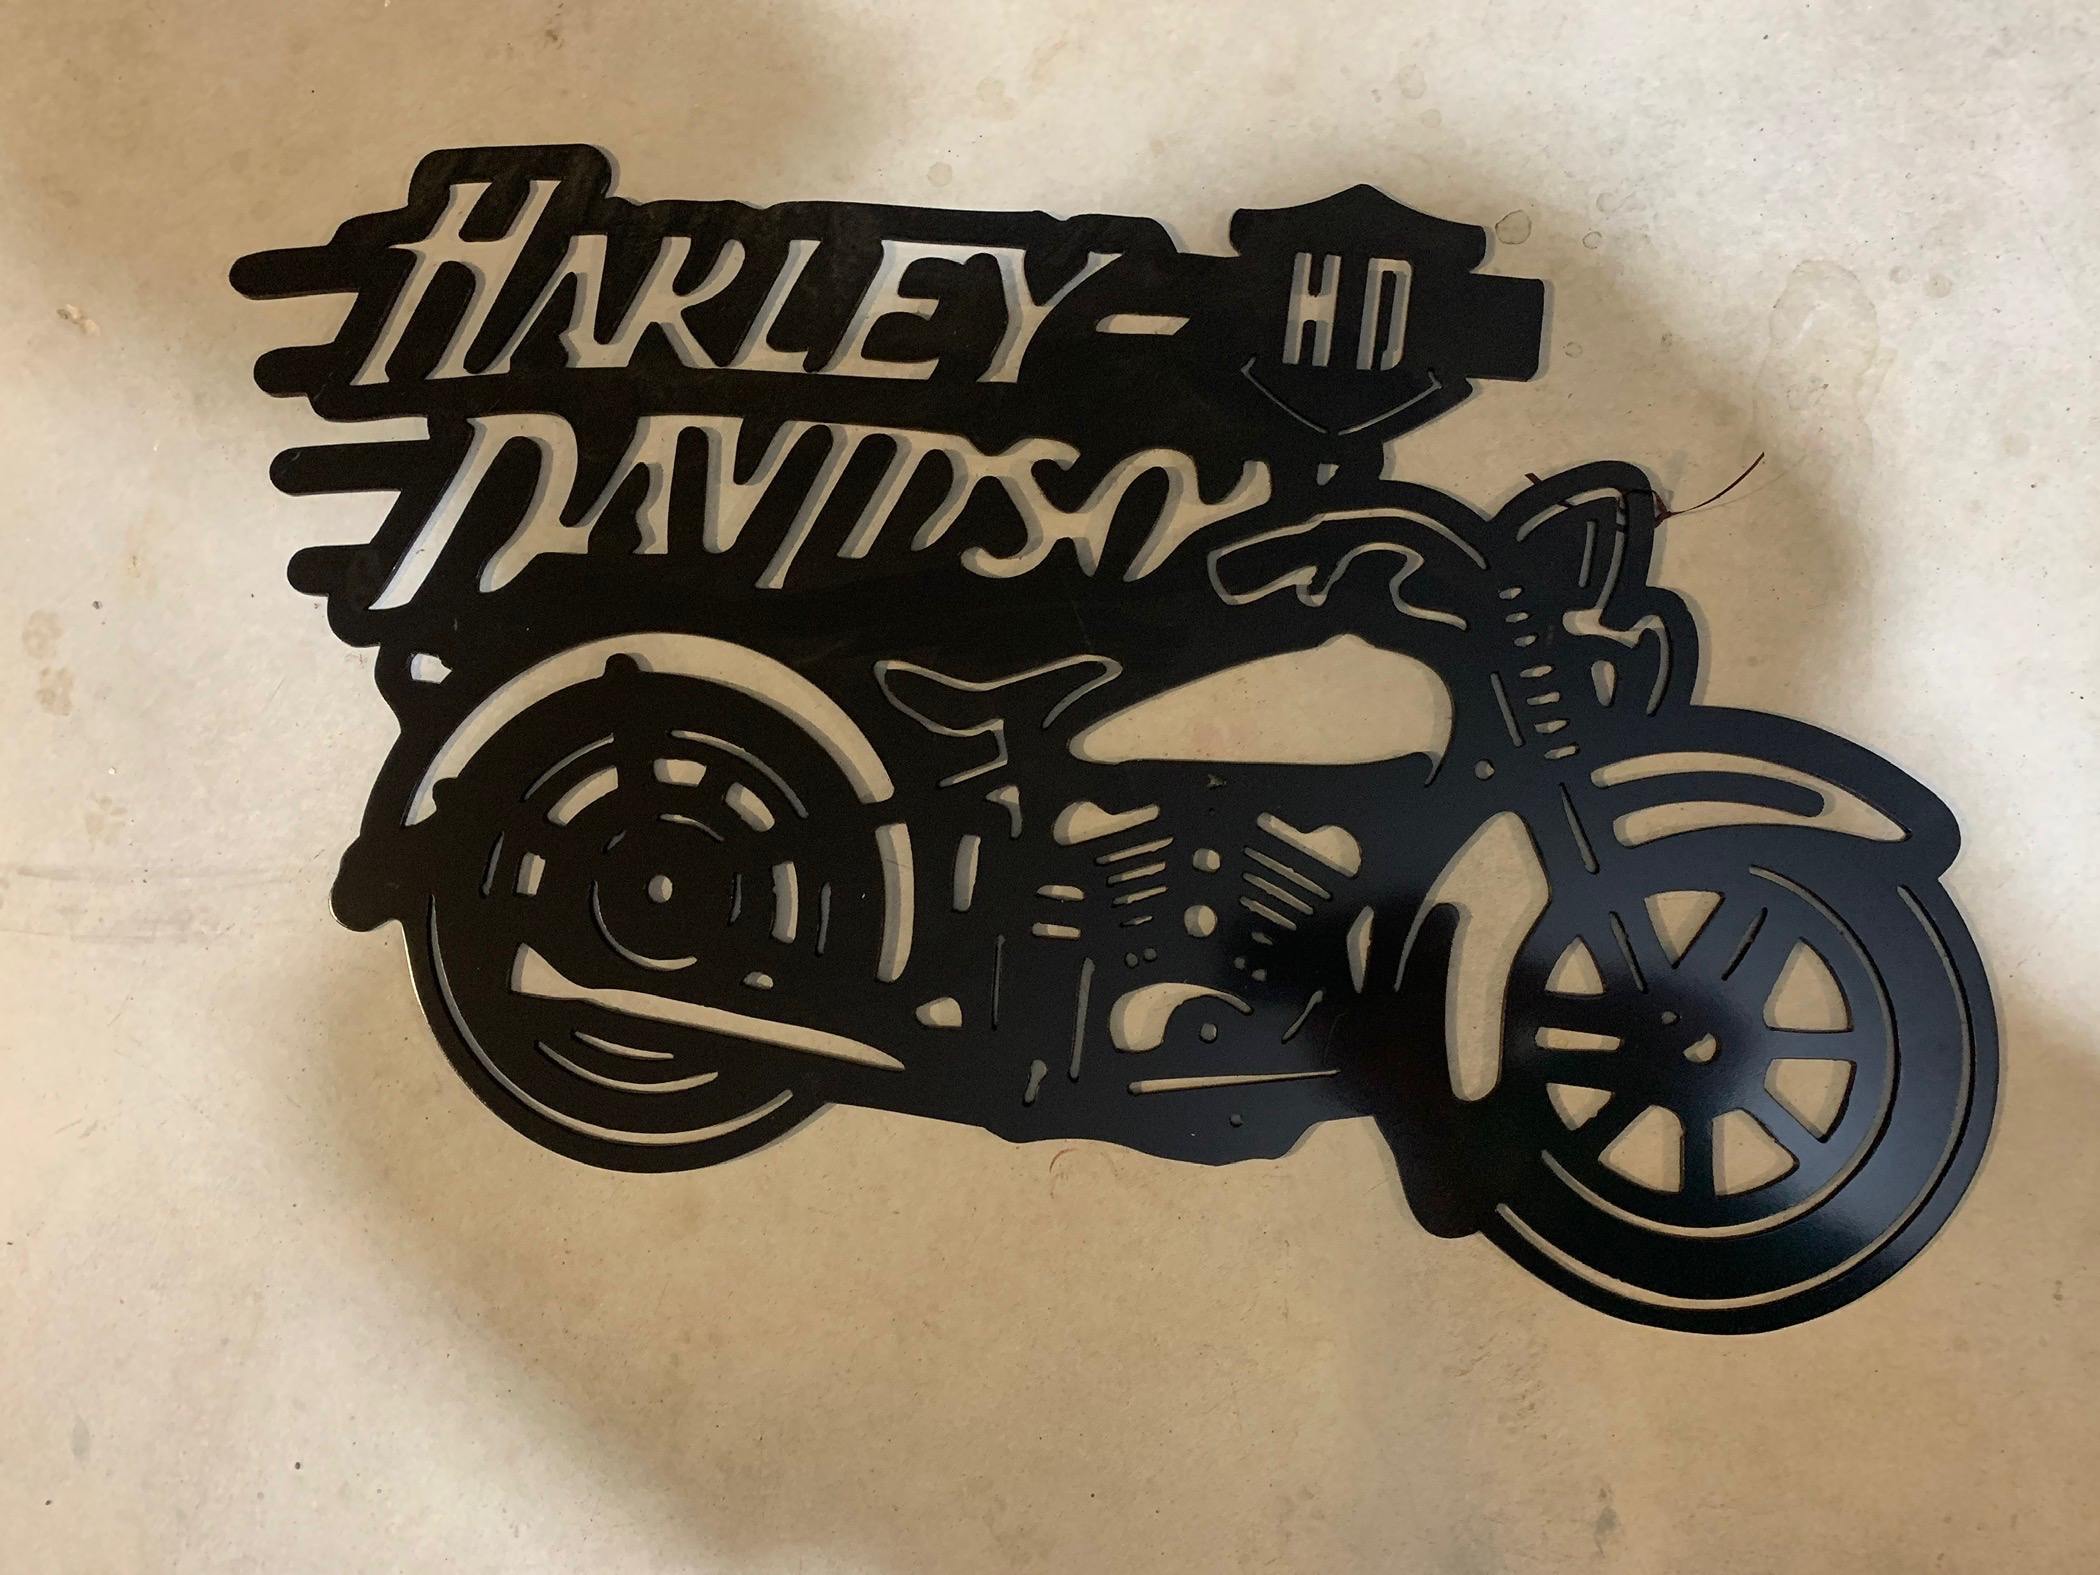 Motorcycle sign